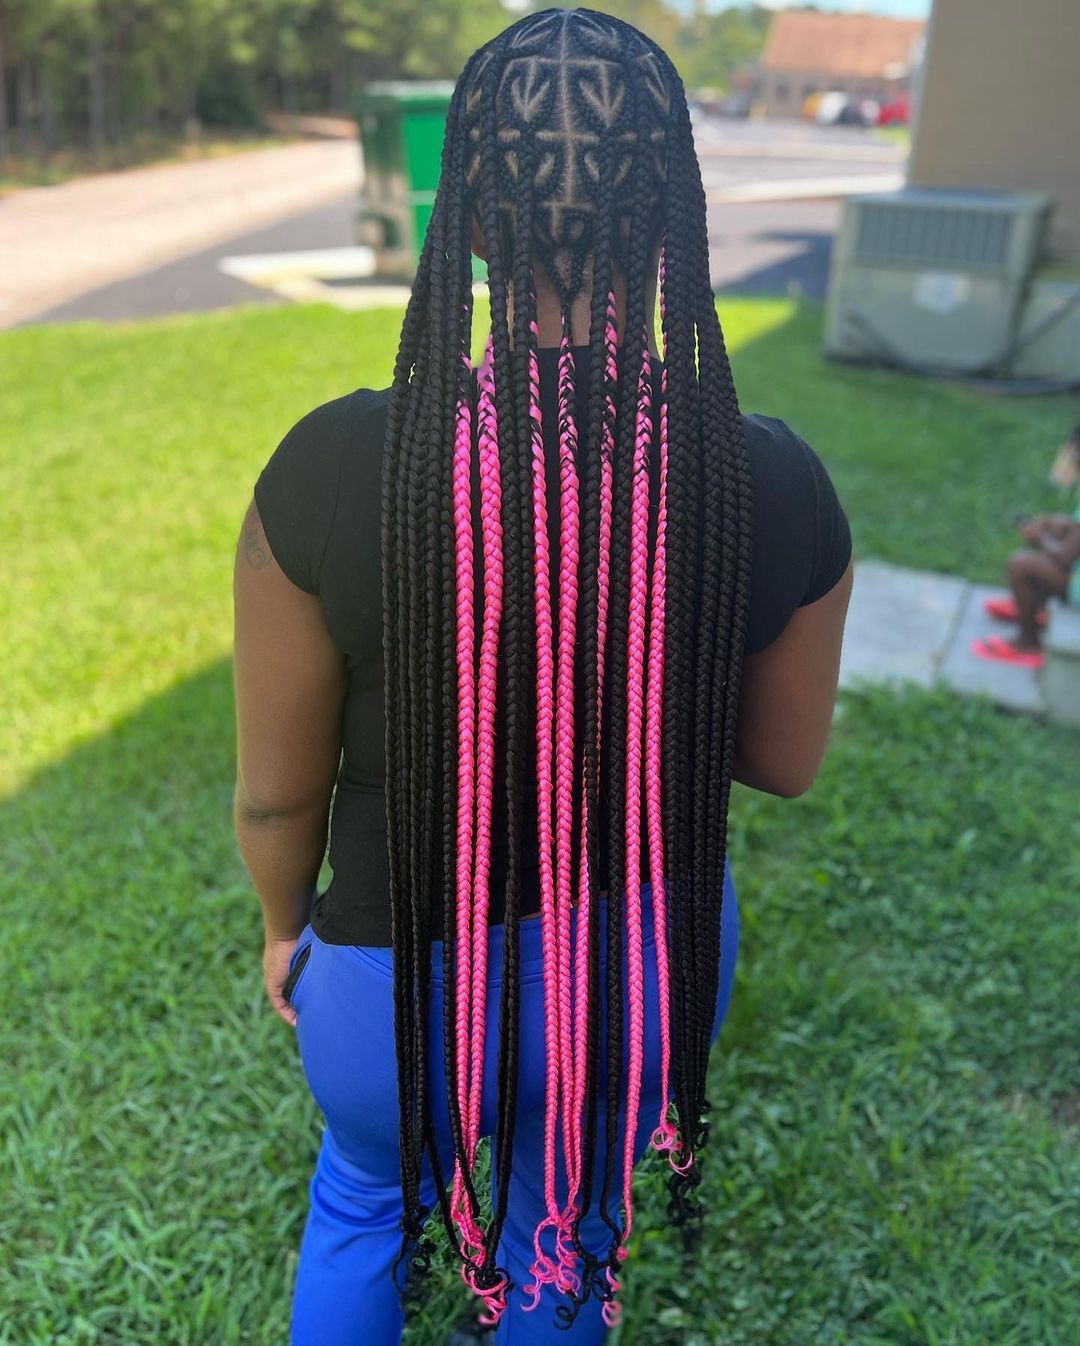 24. Hip Length Black And Pink Heart Parted Knotless Braids